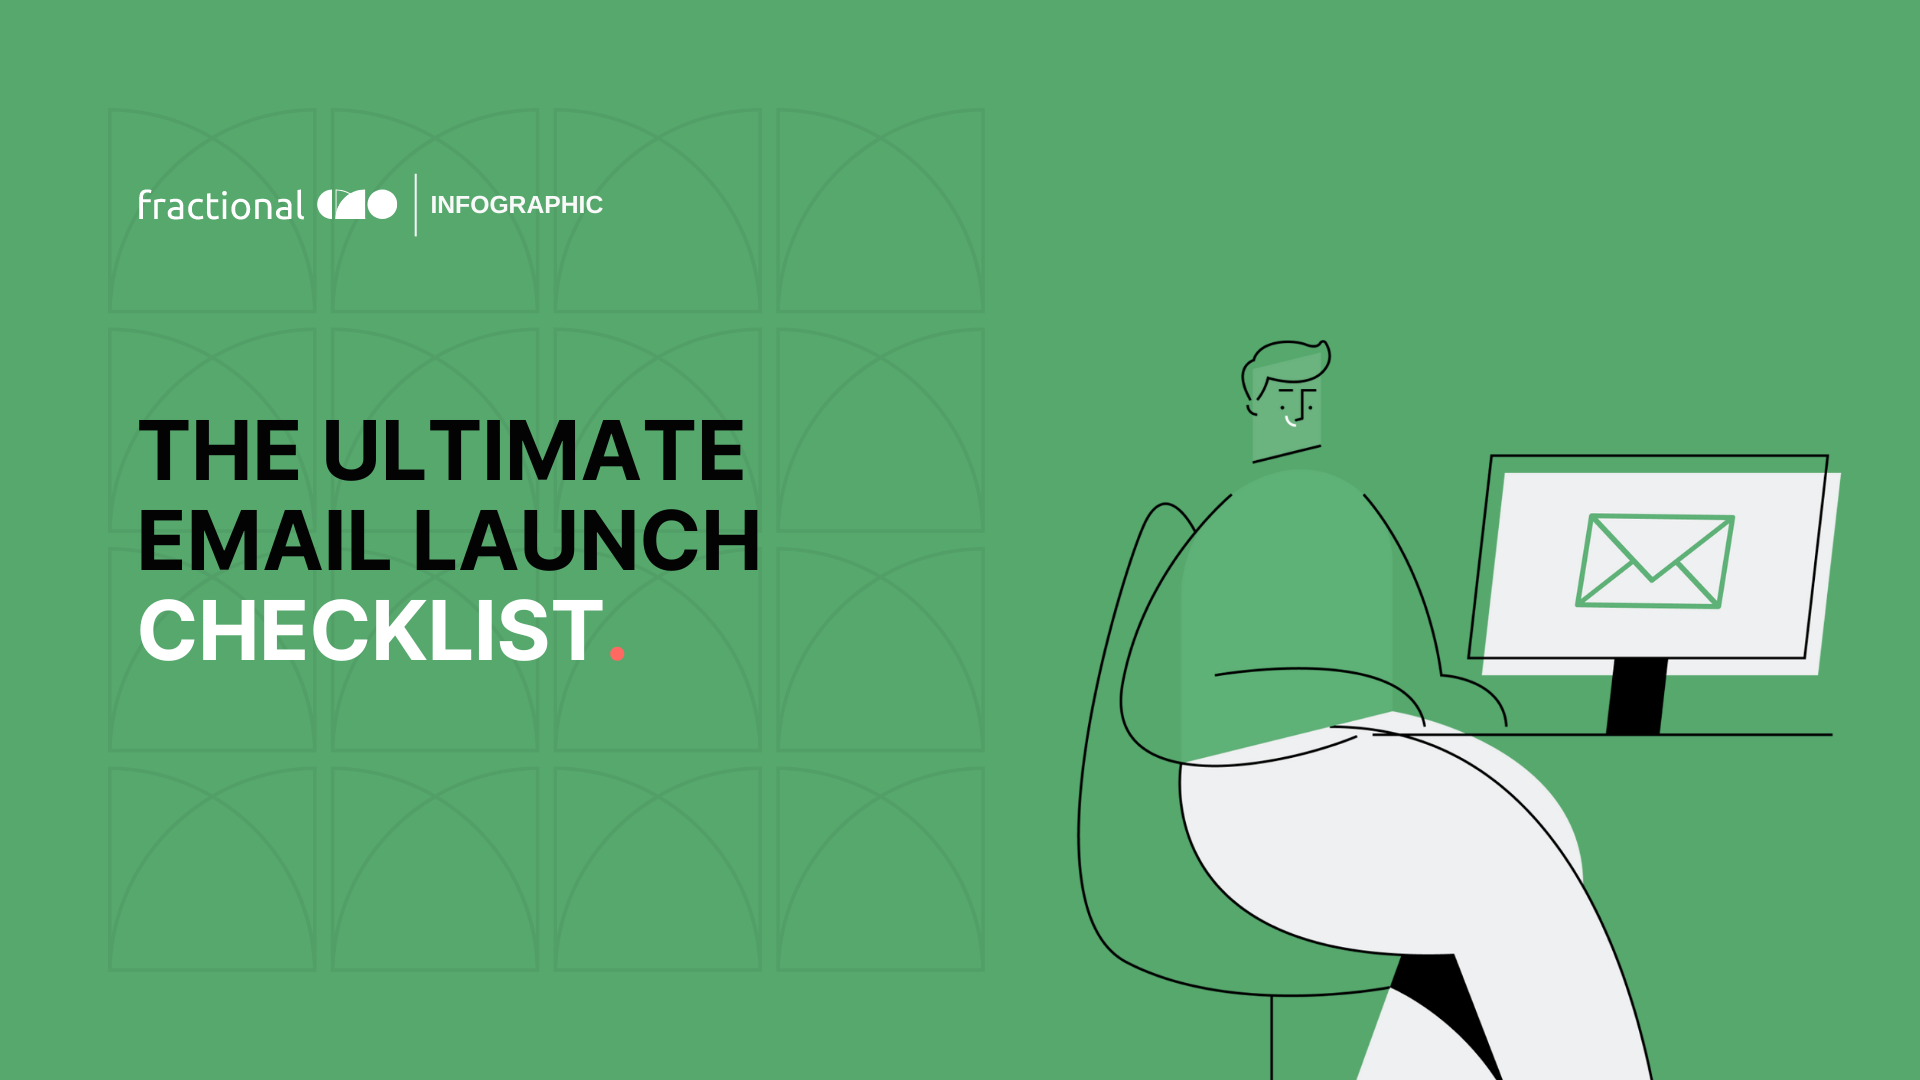 The ultimate email launch checklist